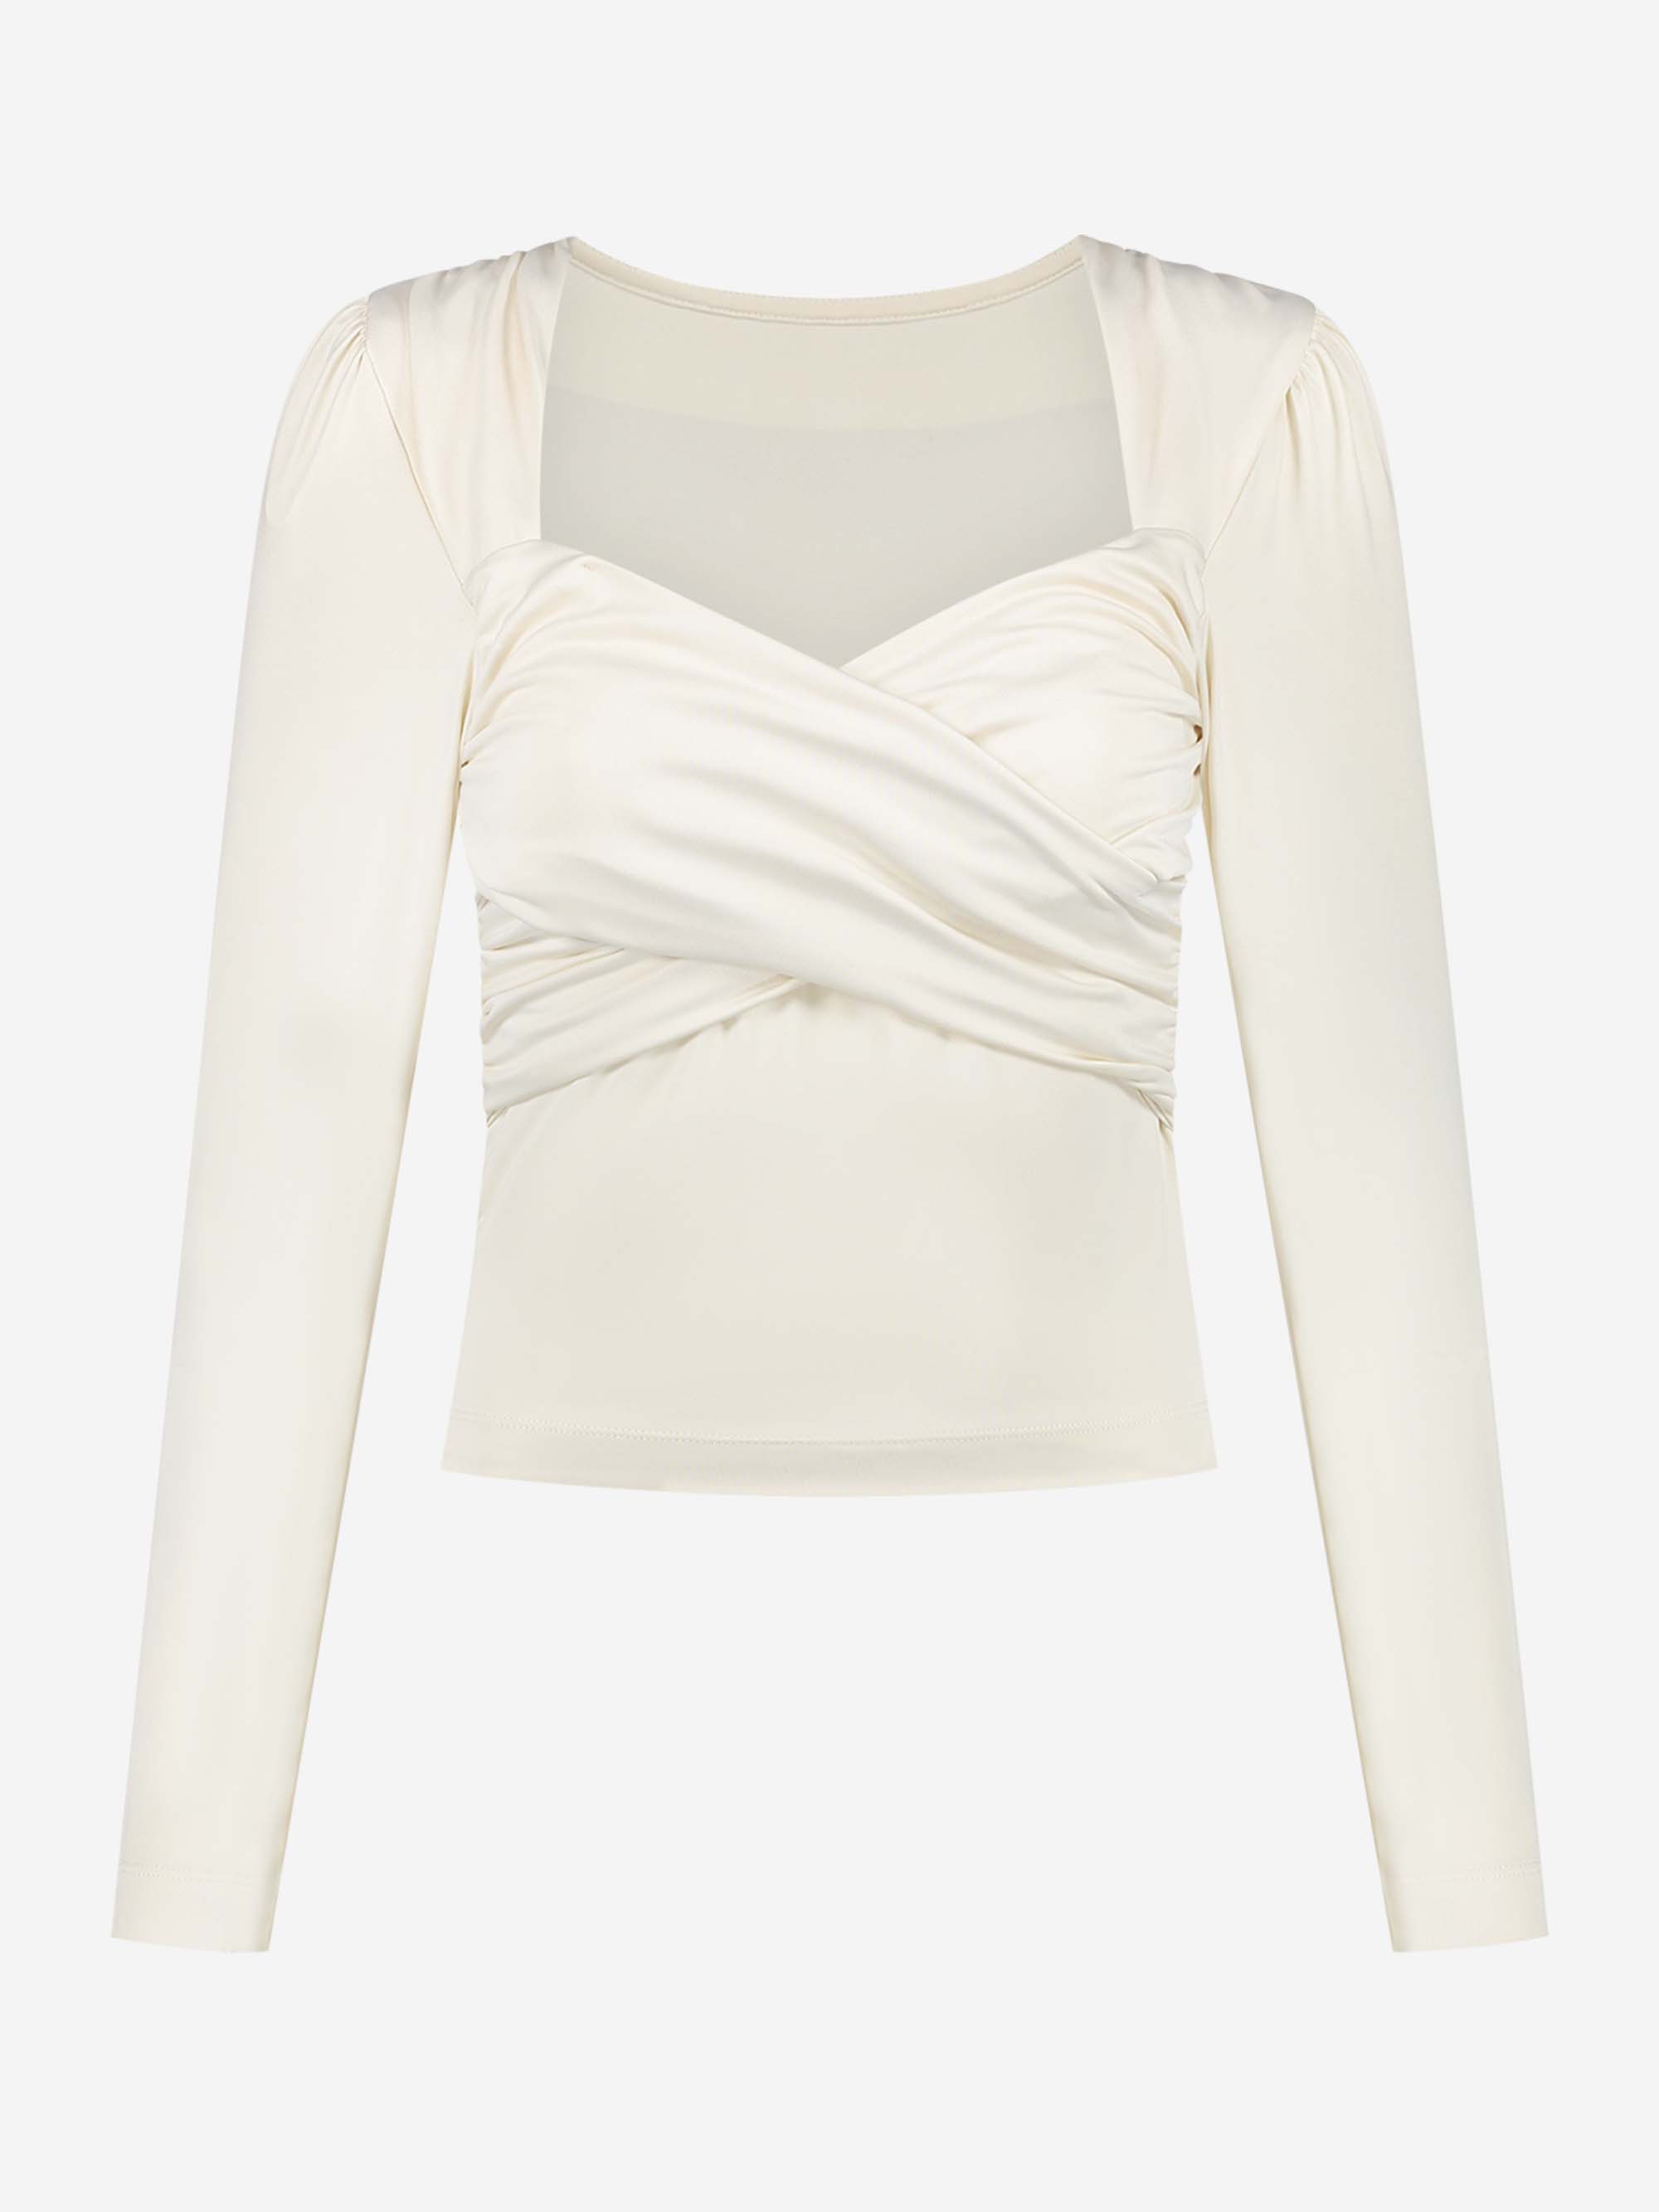  Fitted top with crossed neckline